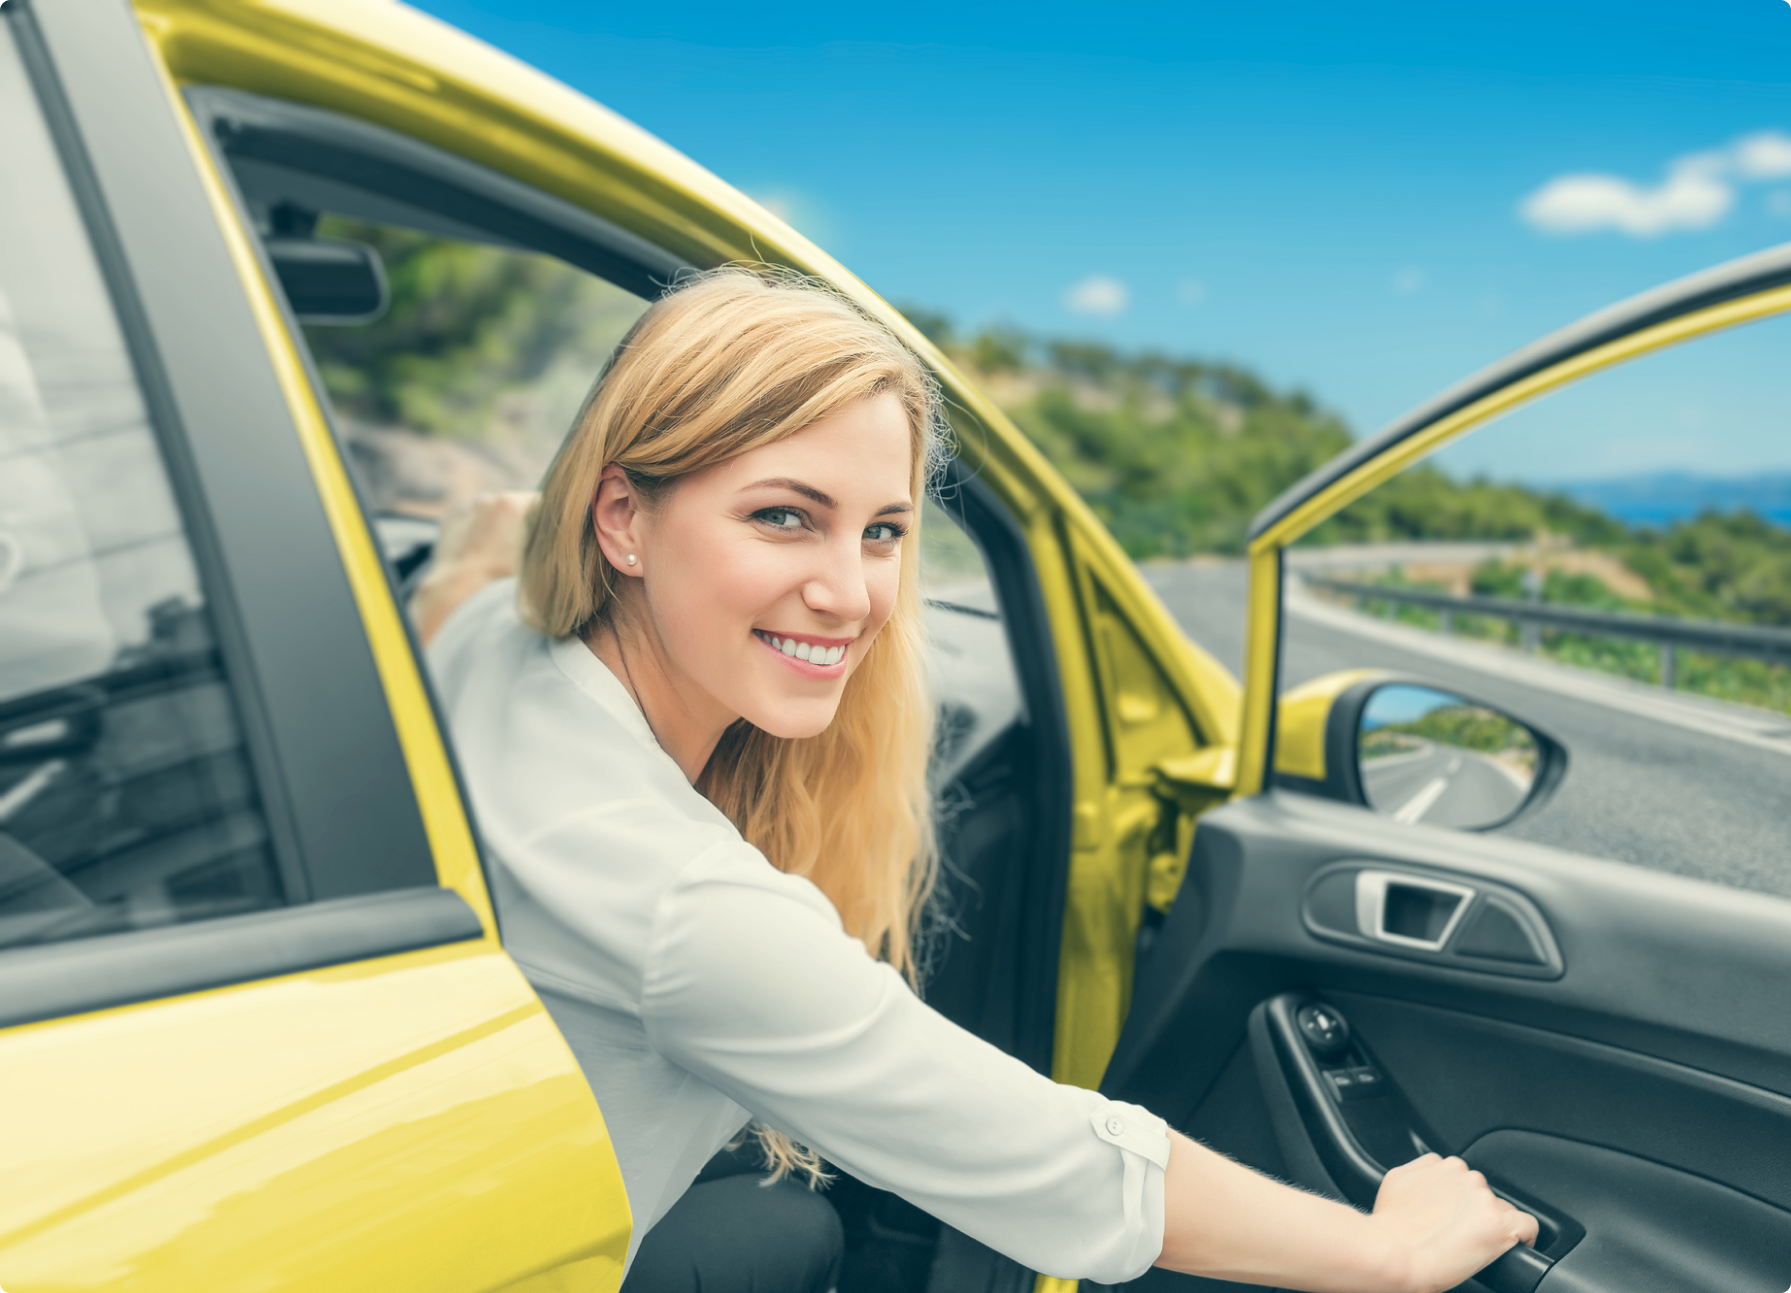 A woman sitting in the driver's seat of a yellow car, potentially considering a novated lease.